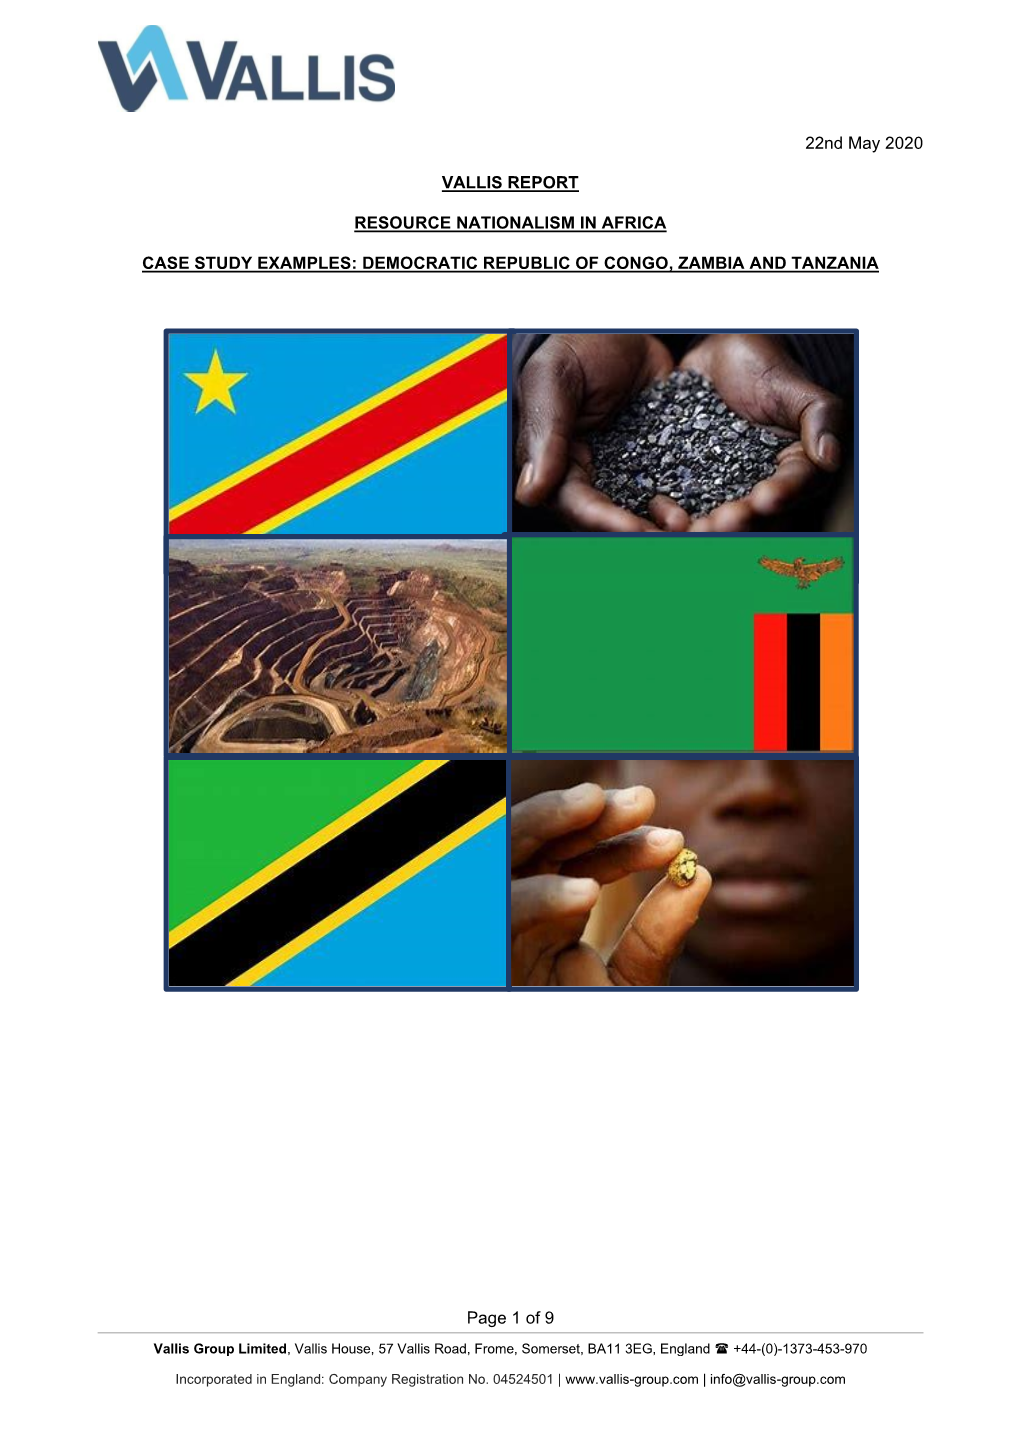 Page 1 of 9 22Nd May 2020 VALLIS REPORT RESOURCE NATIONALISM in AFRICA CASE STUDY EXAMPLES: DEMOCRATIC REPUBLIC of CONGO, ZAMBIA